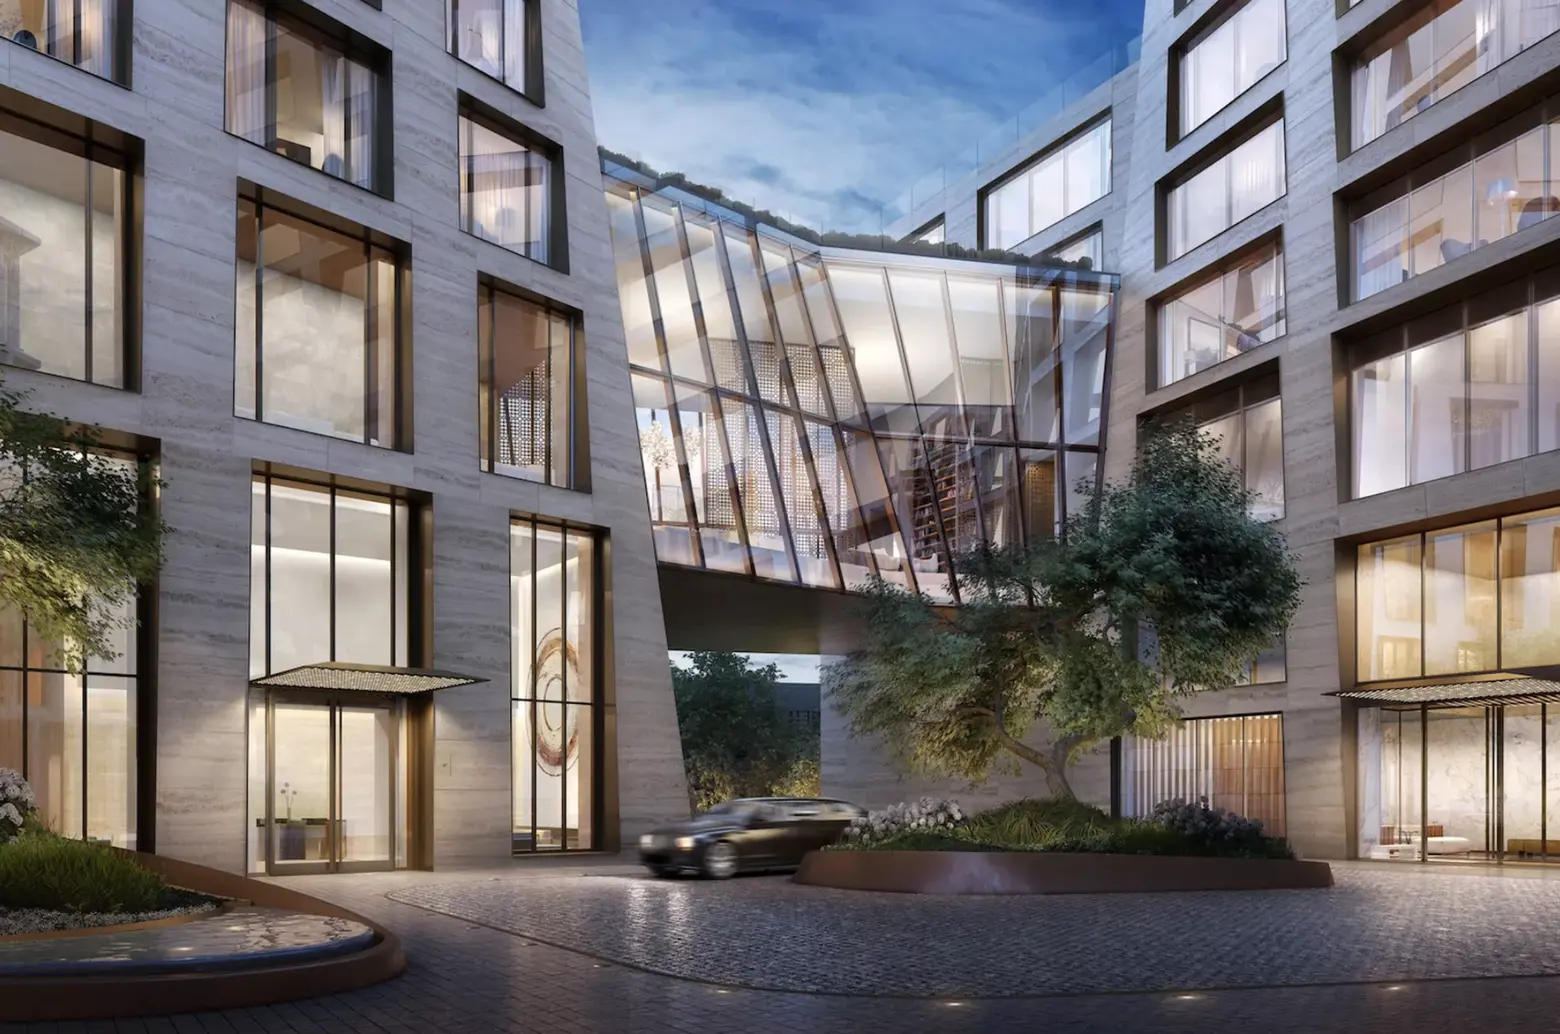 Get a first look at the amenities at Bjarke Ingels' High Line 